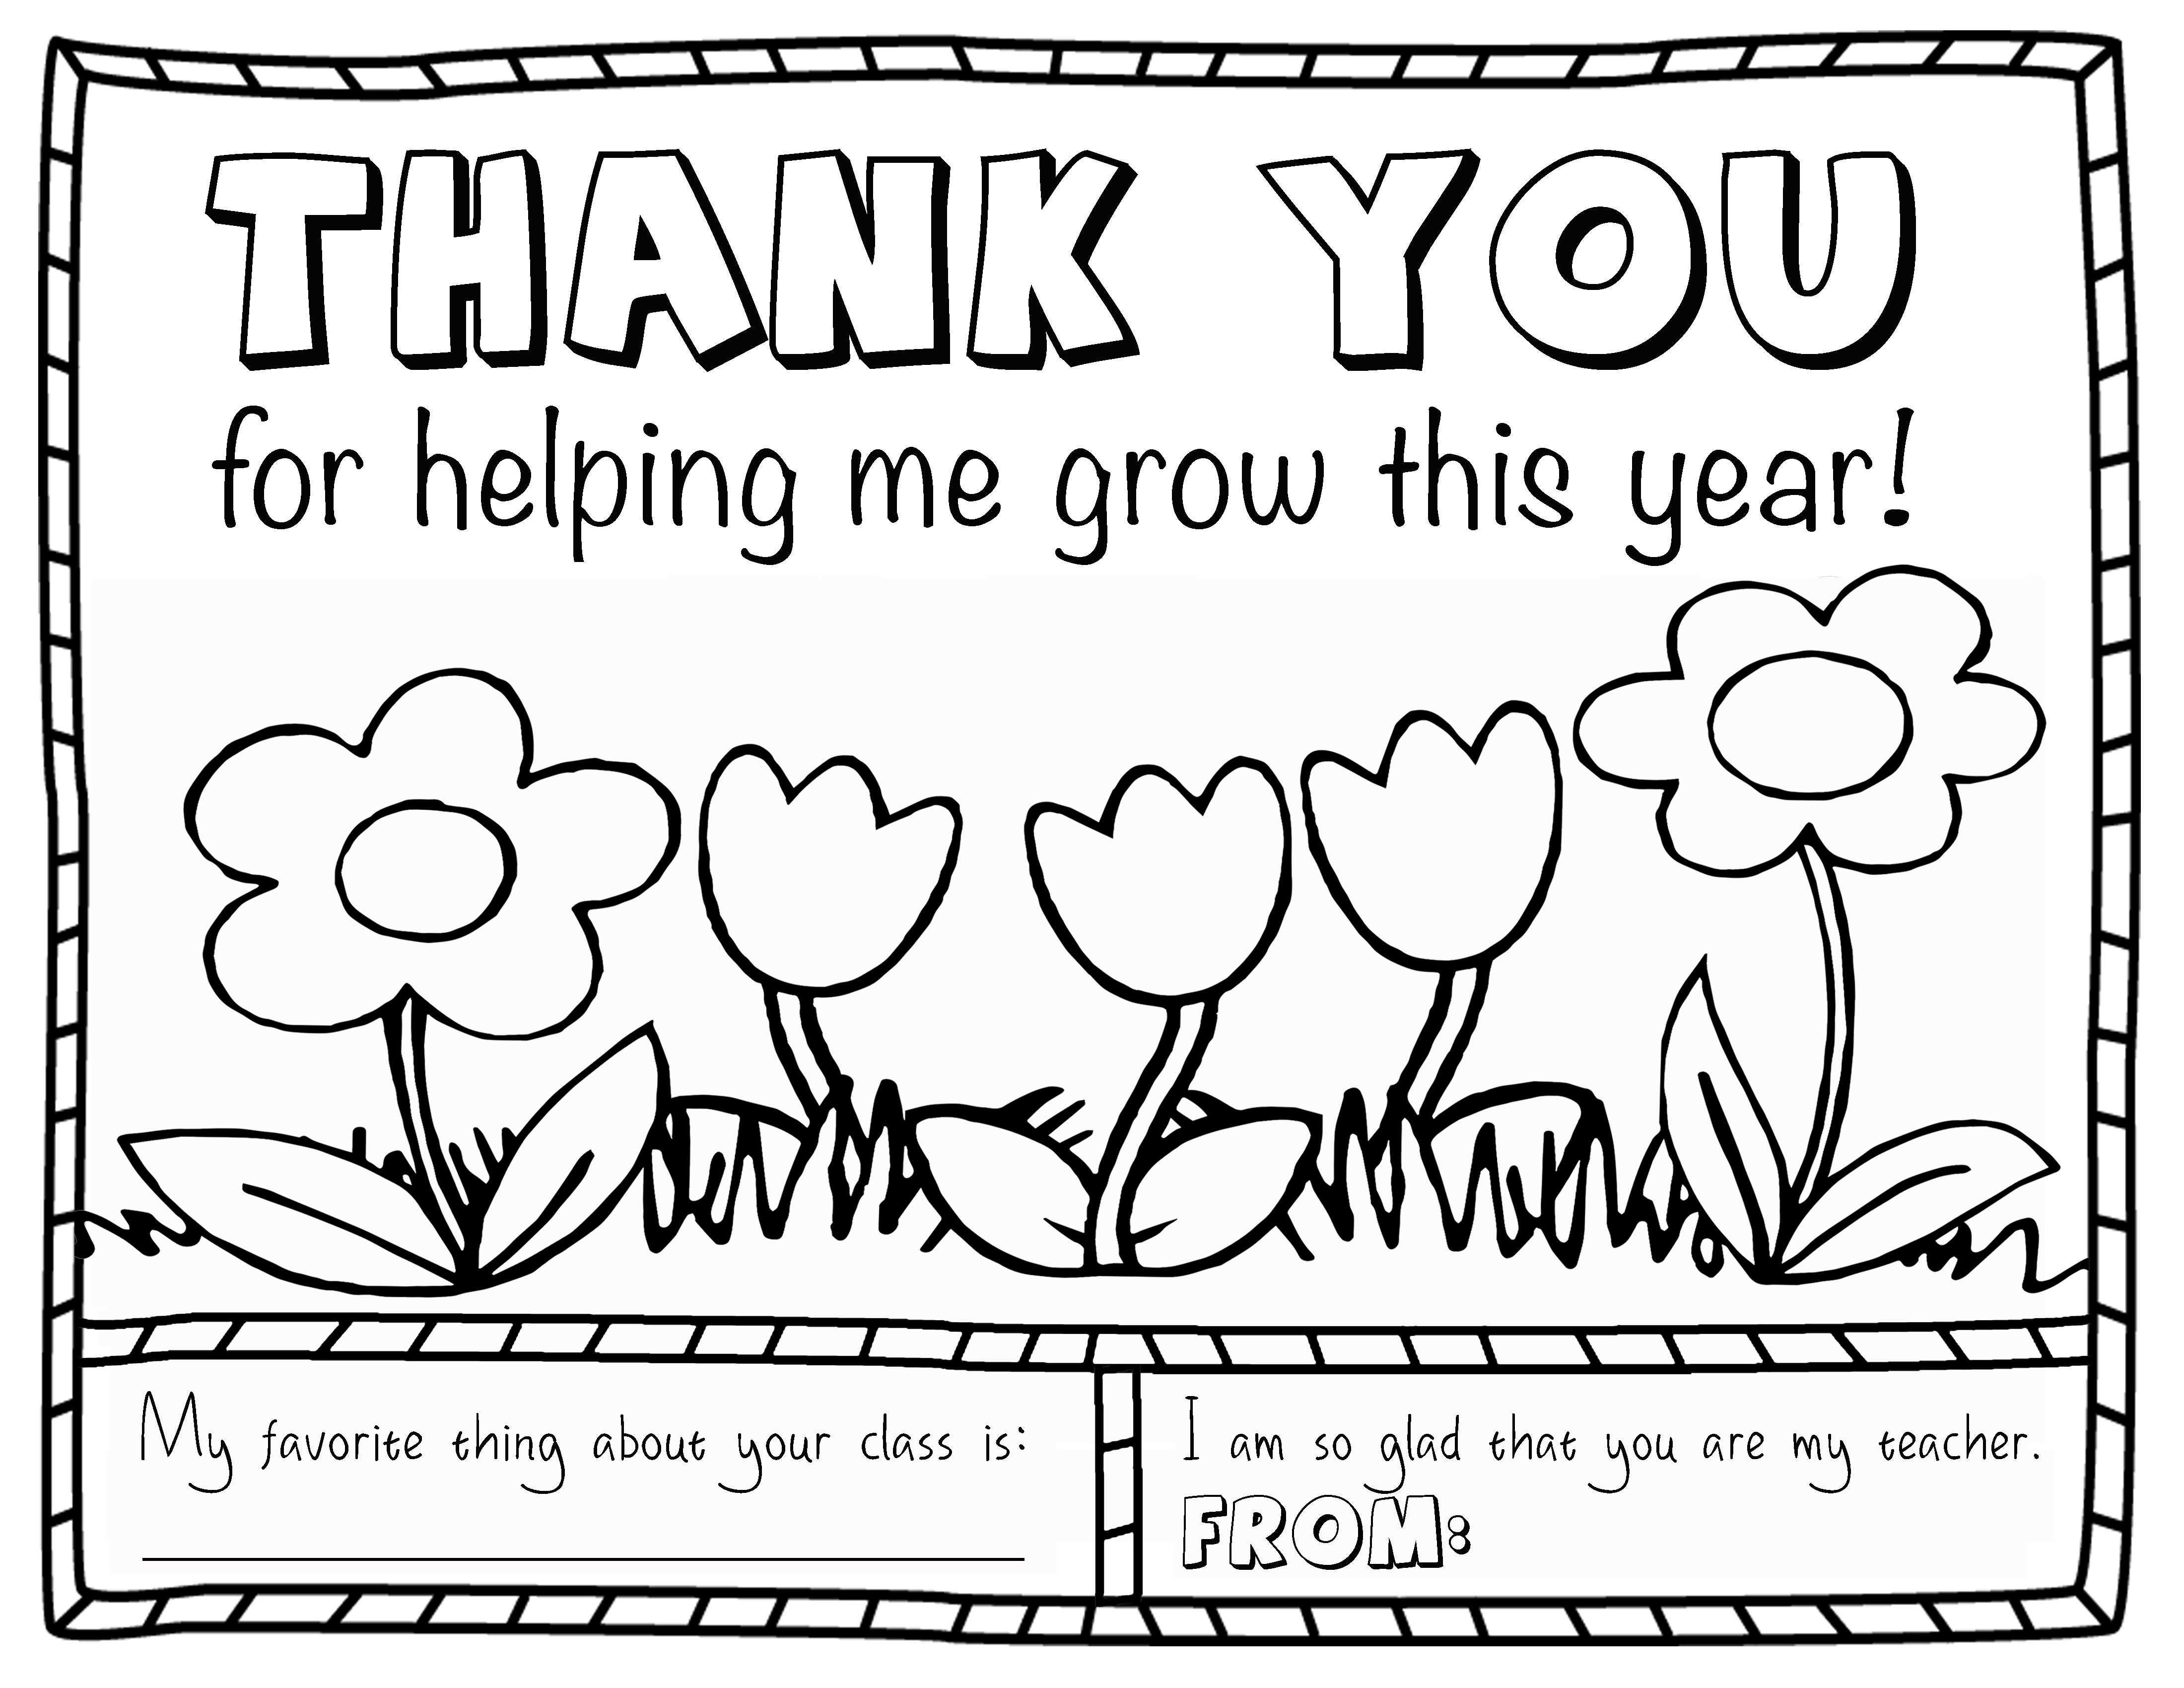 Coloring Pages : Teacher Appreciation Coloring Pages Teacher - Free Printable Teacher Appreciation Cards To Color